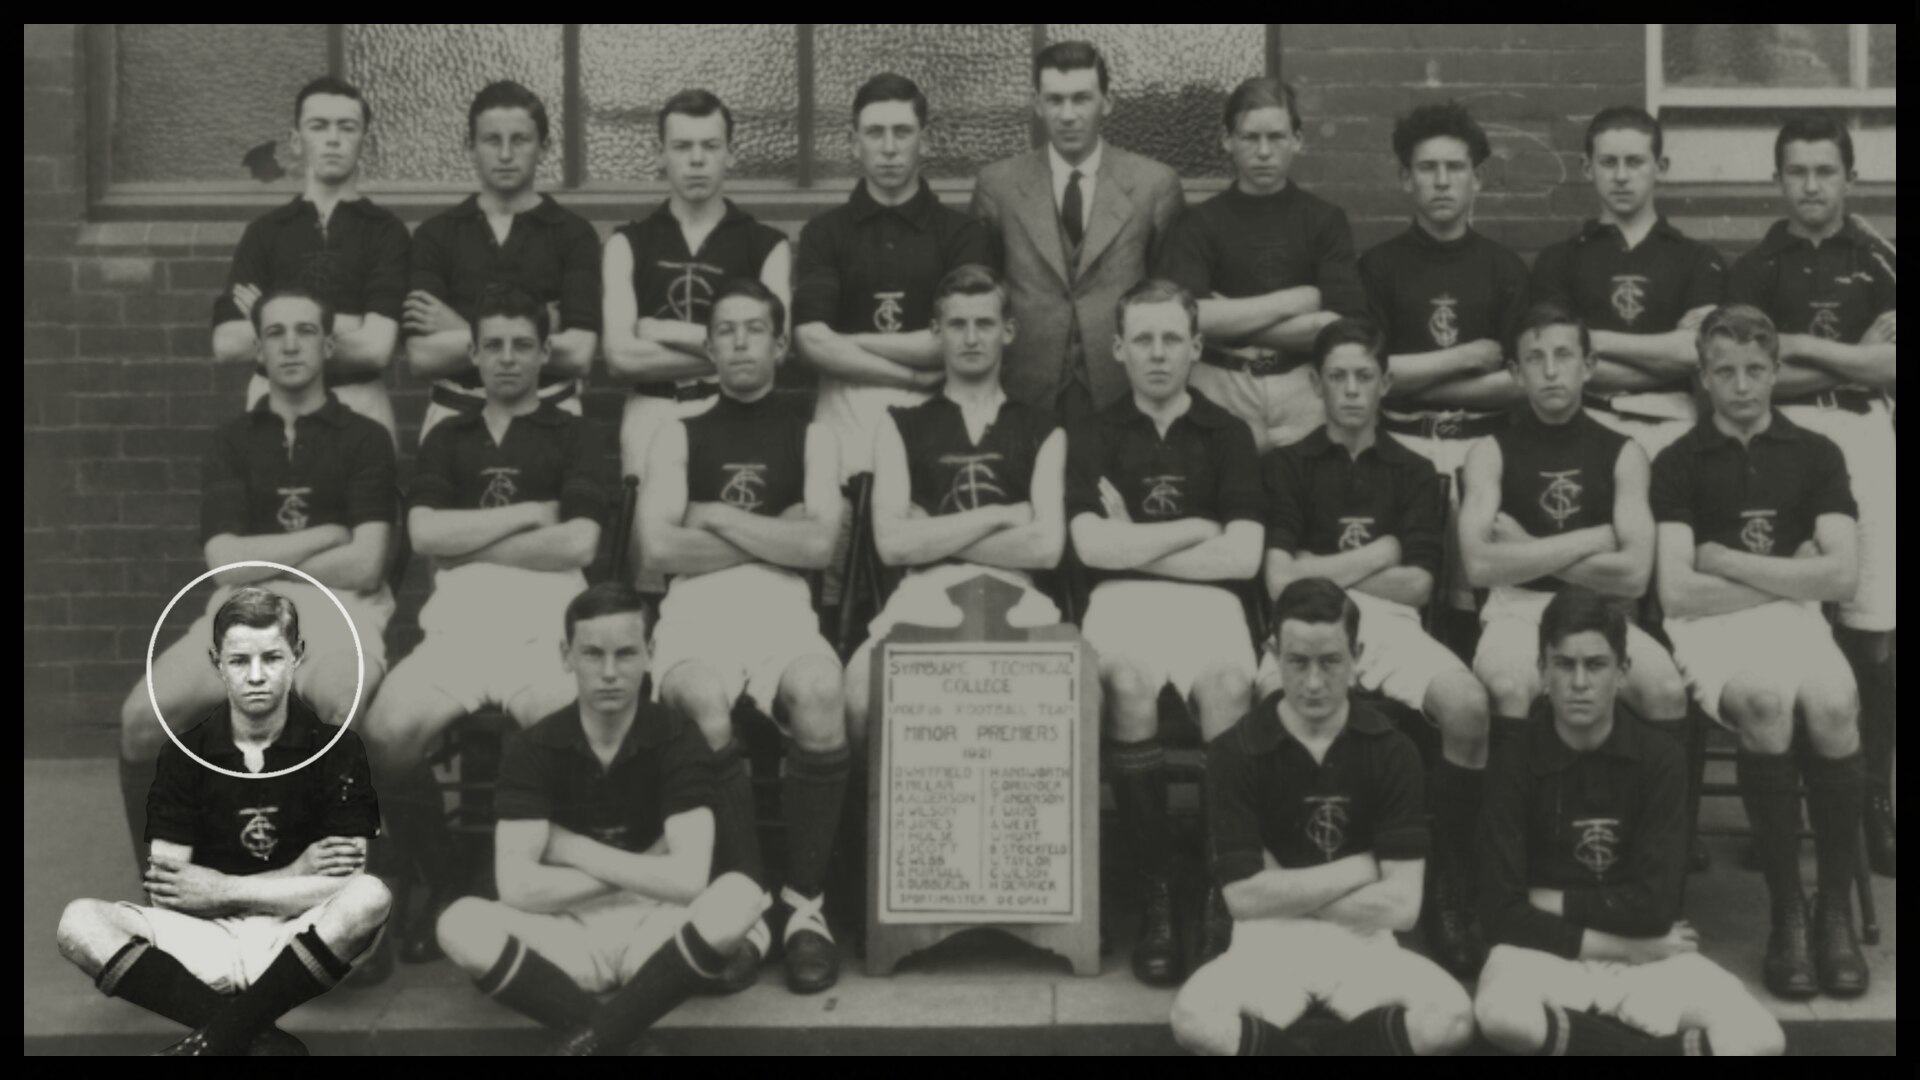 A black and white team photo of an AFL team with bottom left young man circled